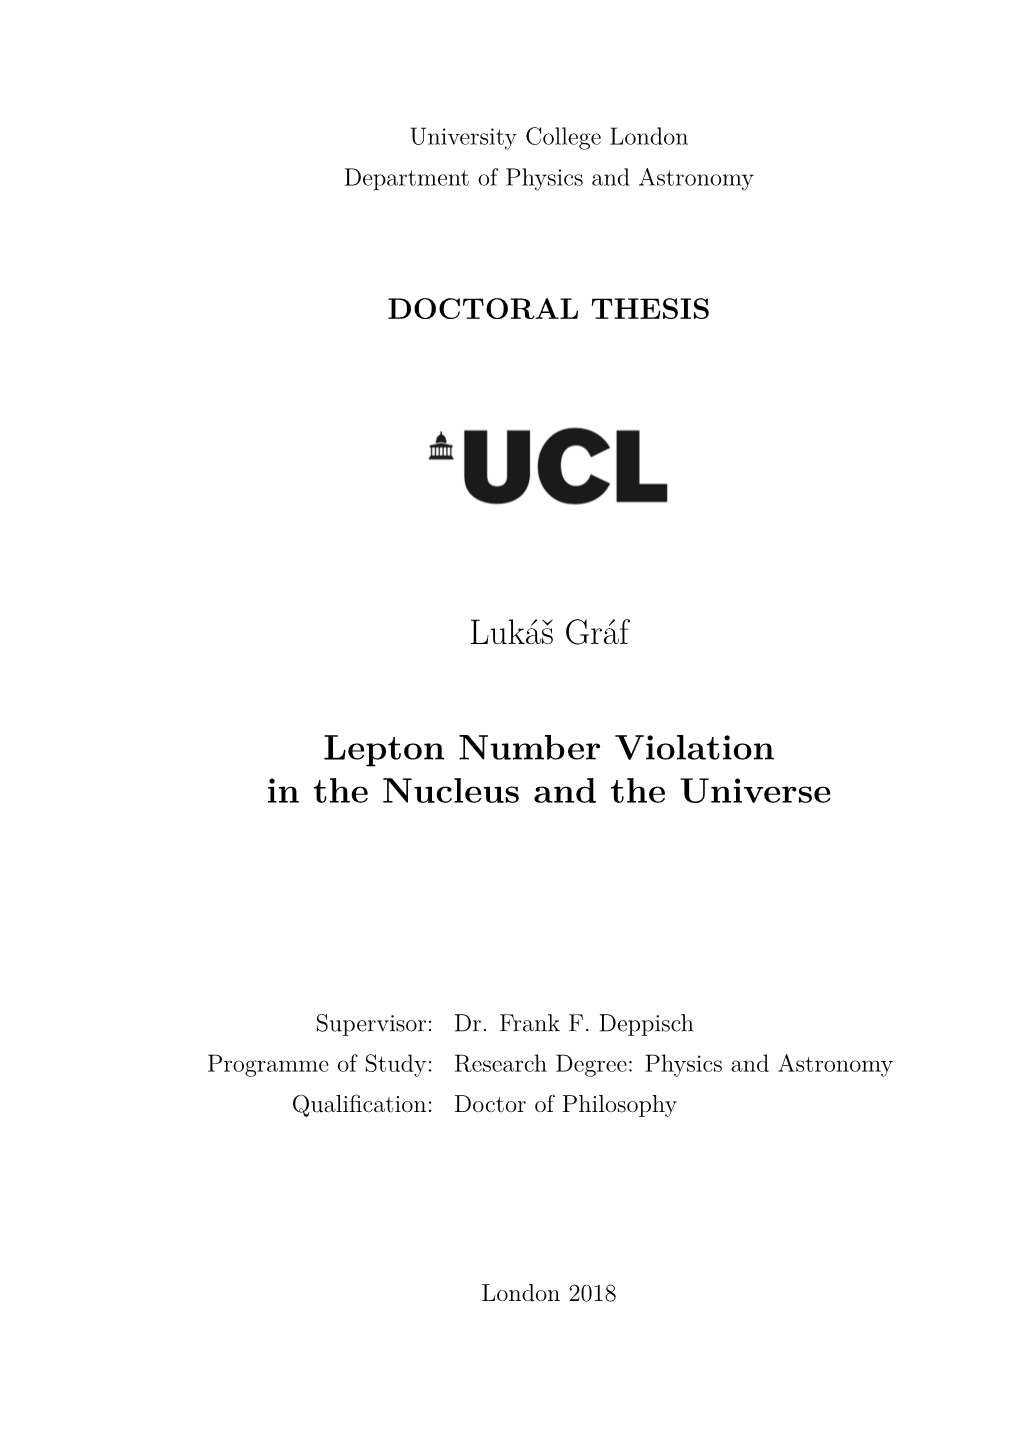 Lepton Number Violation in the Nucleus and the Universe